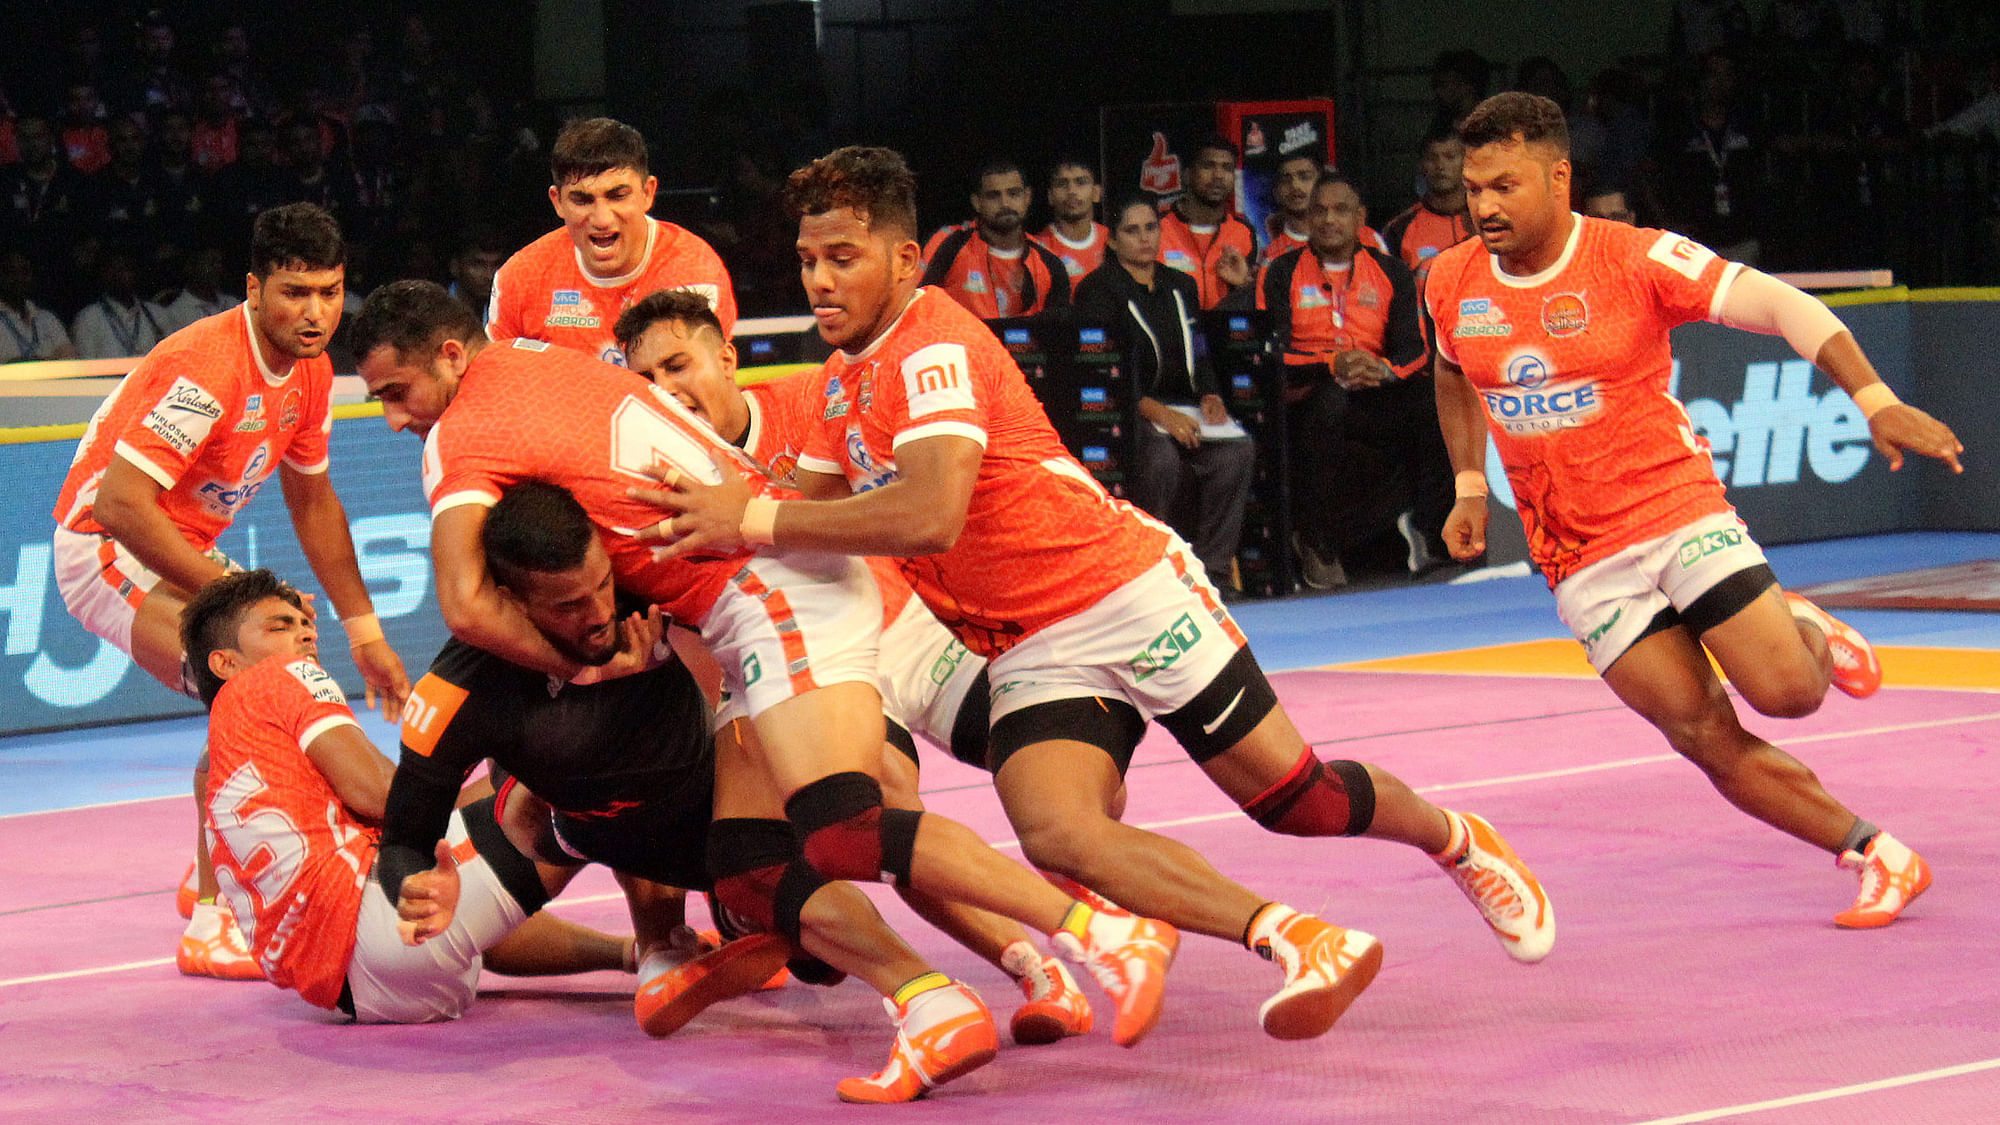  Puneri Paltan and U Mumba played out a scintillating tie on the opening day of the sixth season of the Pro Kabaddi League.